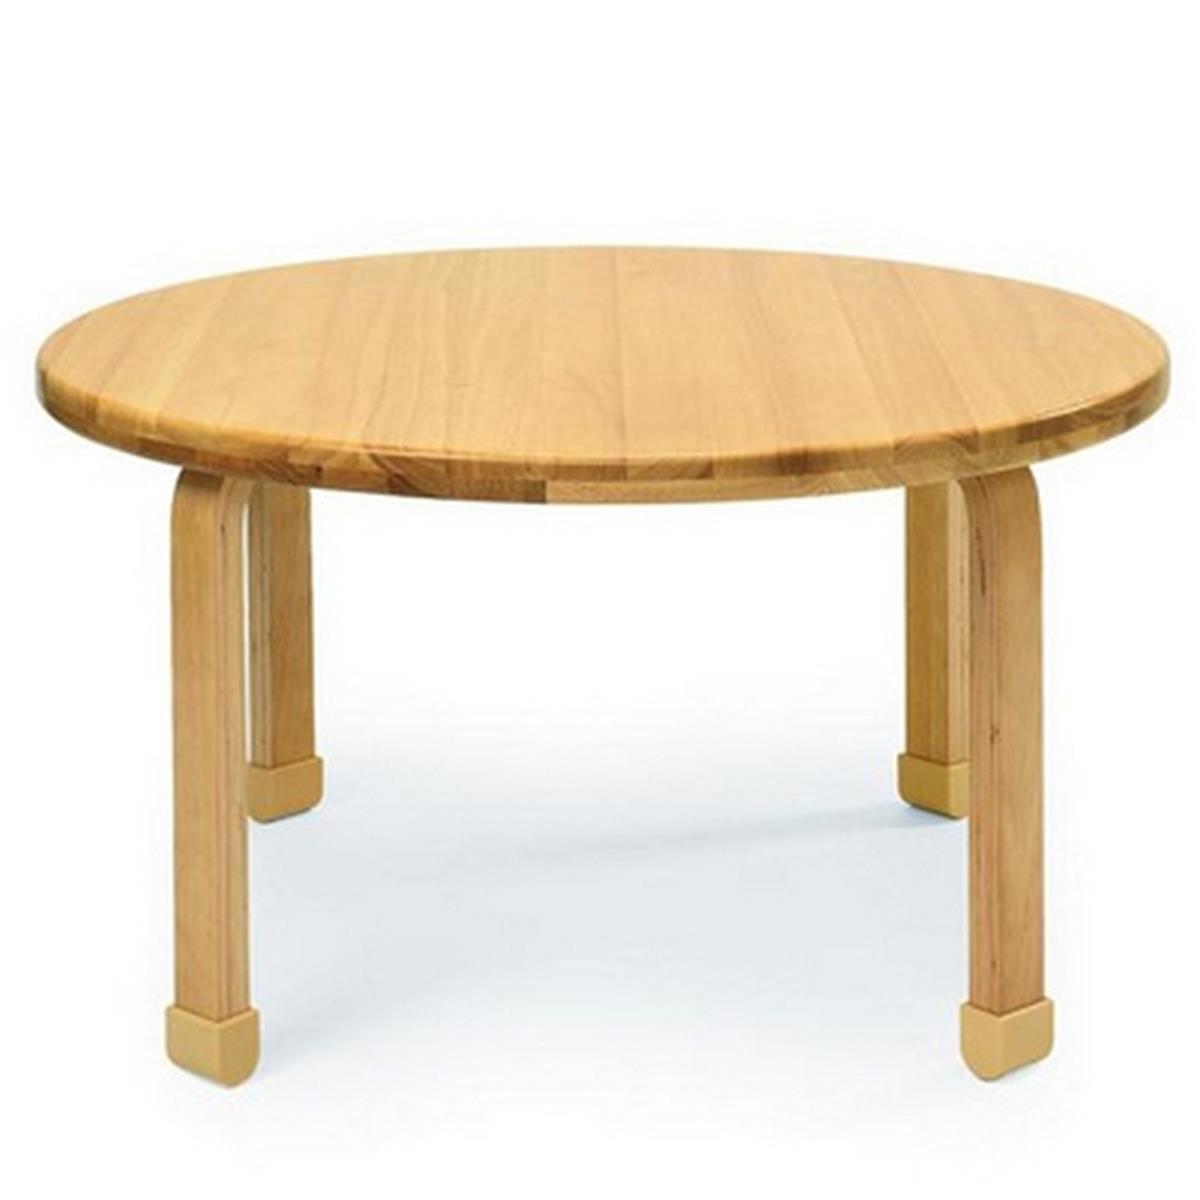 Angeles Ab7820l14 36 In. Dia. Round Natural Wood Table With 14 In. Legs